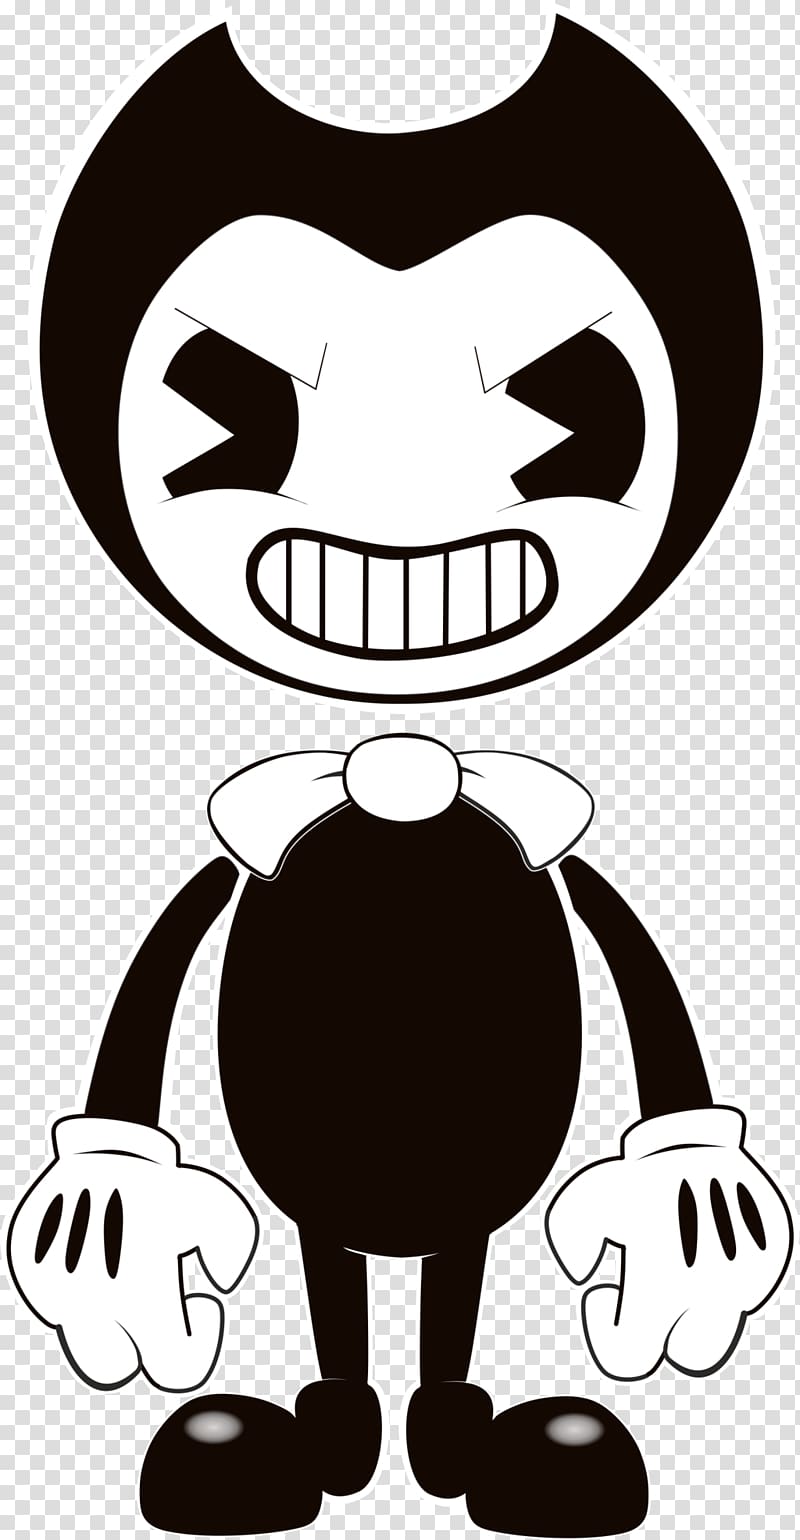 Bendy and the Ink Machine Song Video game TheMeatly Games Survival horror, Coming Soon transparent background PNG clipart